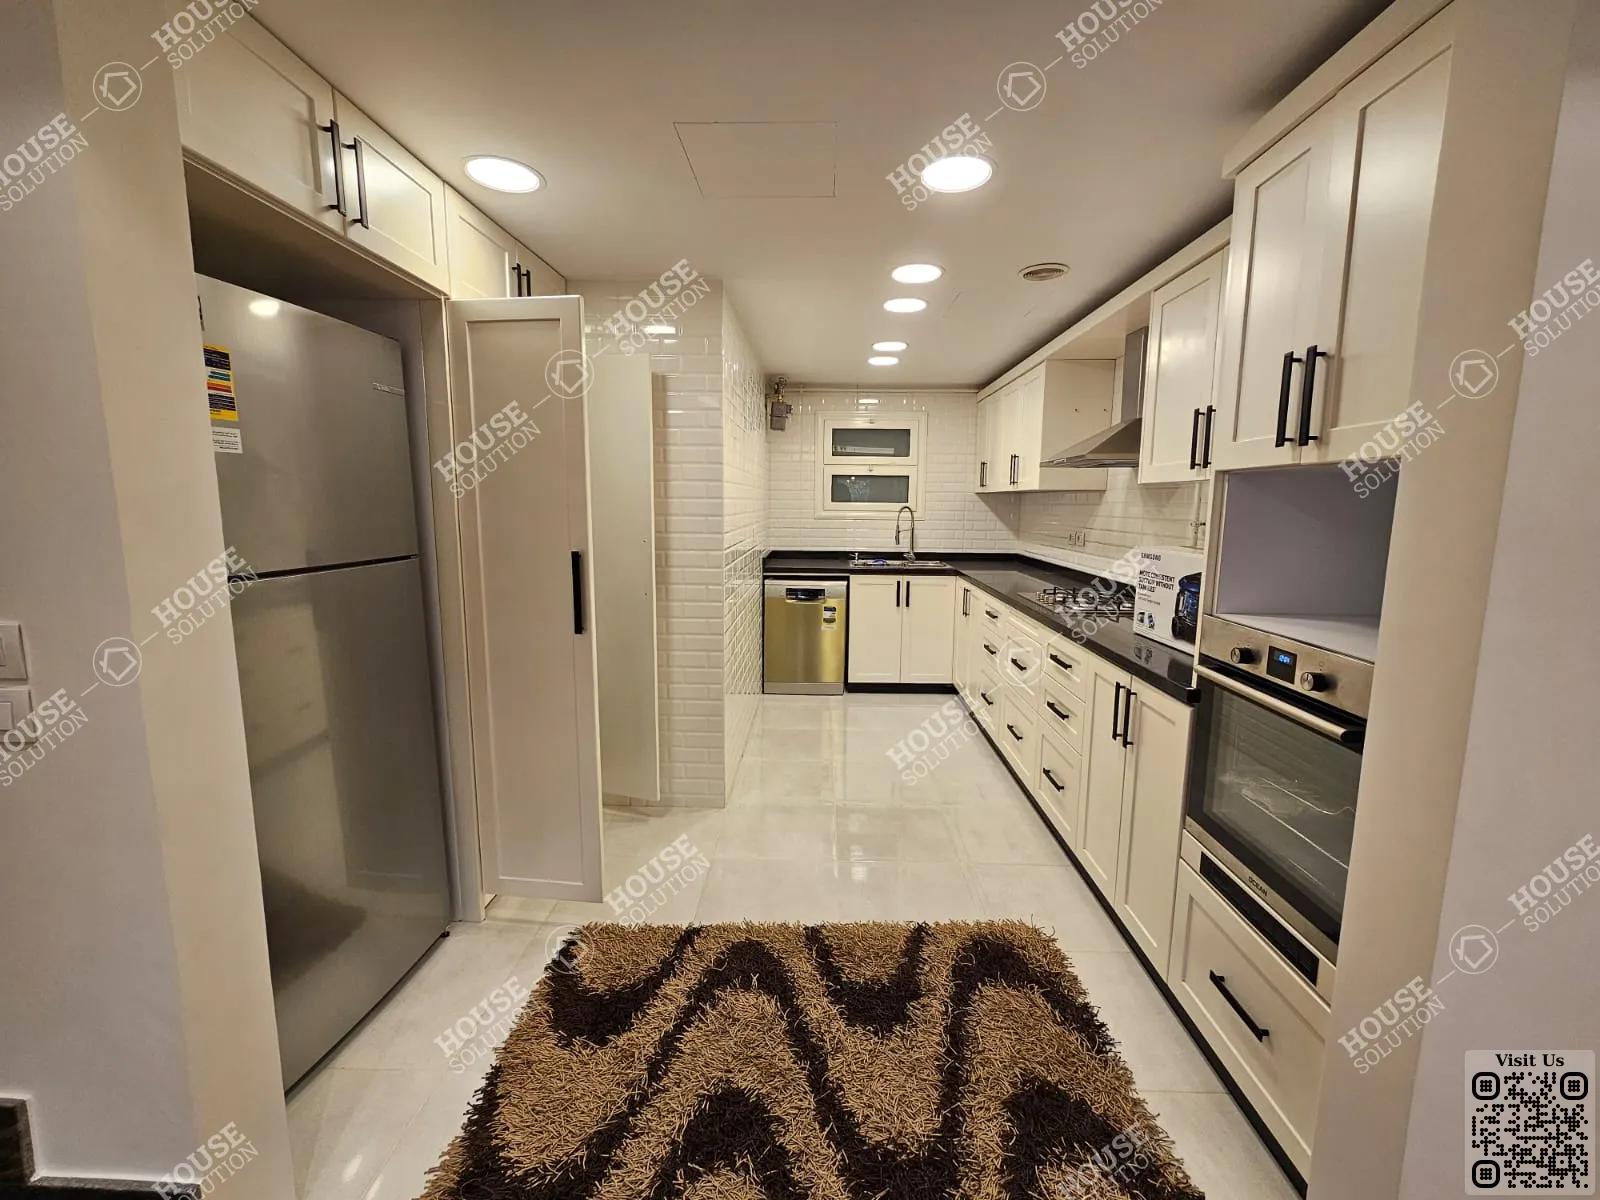 KITCHEN  @ Apartments For Rent In Maadi Maadi Sarayat Area: 175 m² consists of 3 Bedrooms 2 Bathrooms Modern furnished 5 stars #5813-2